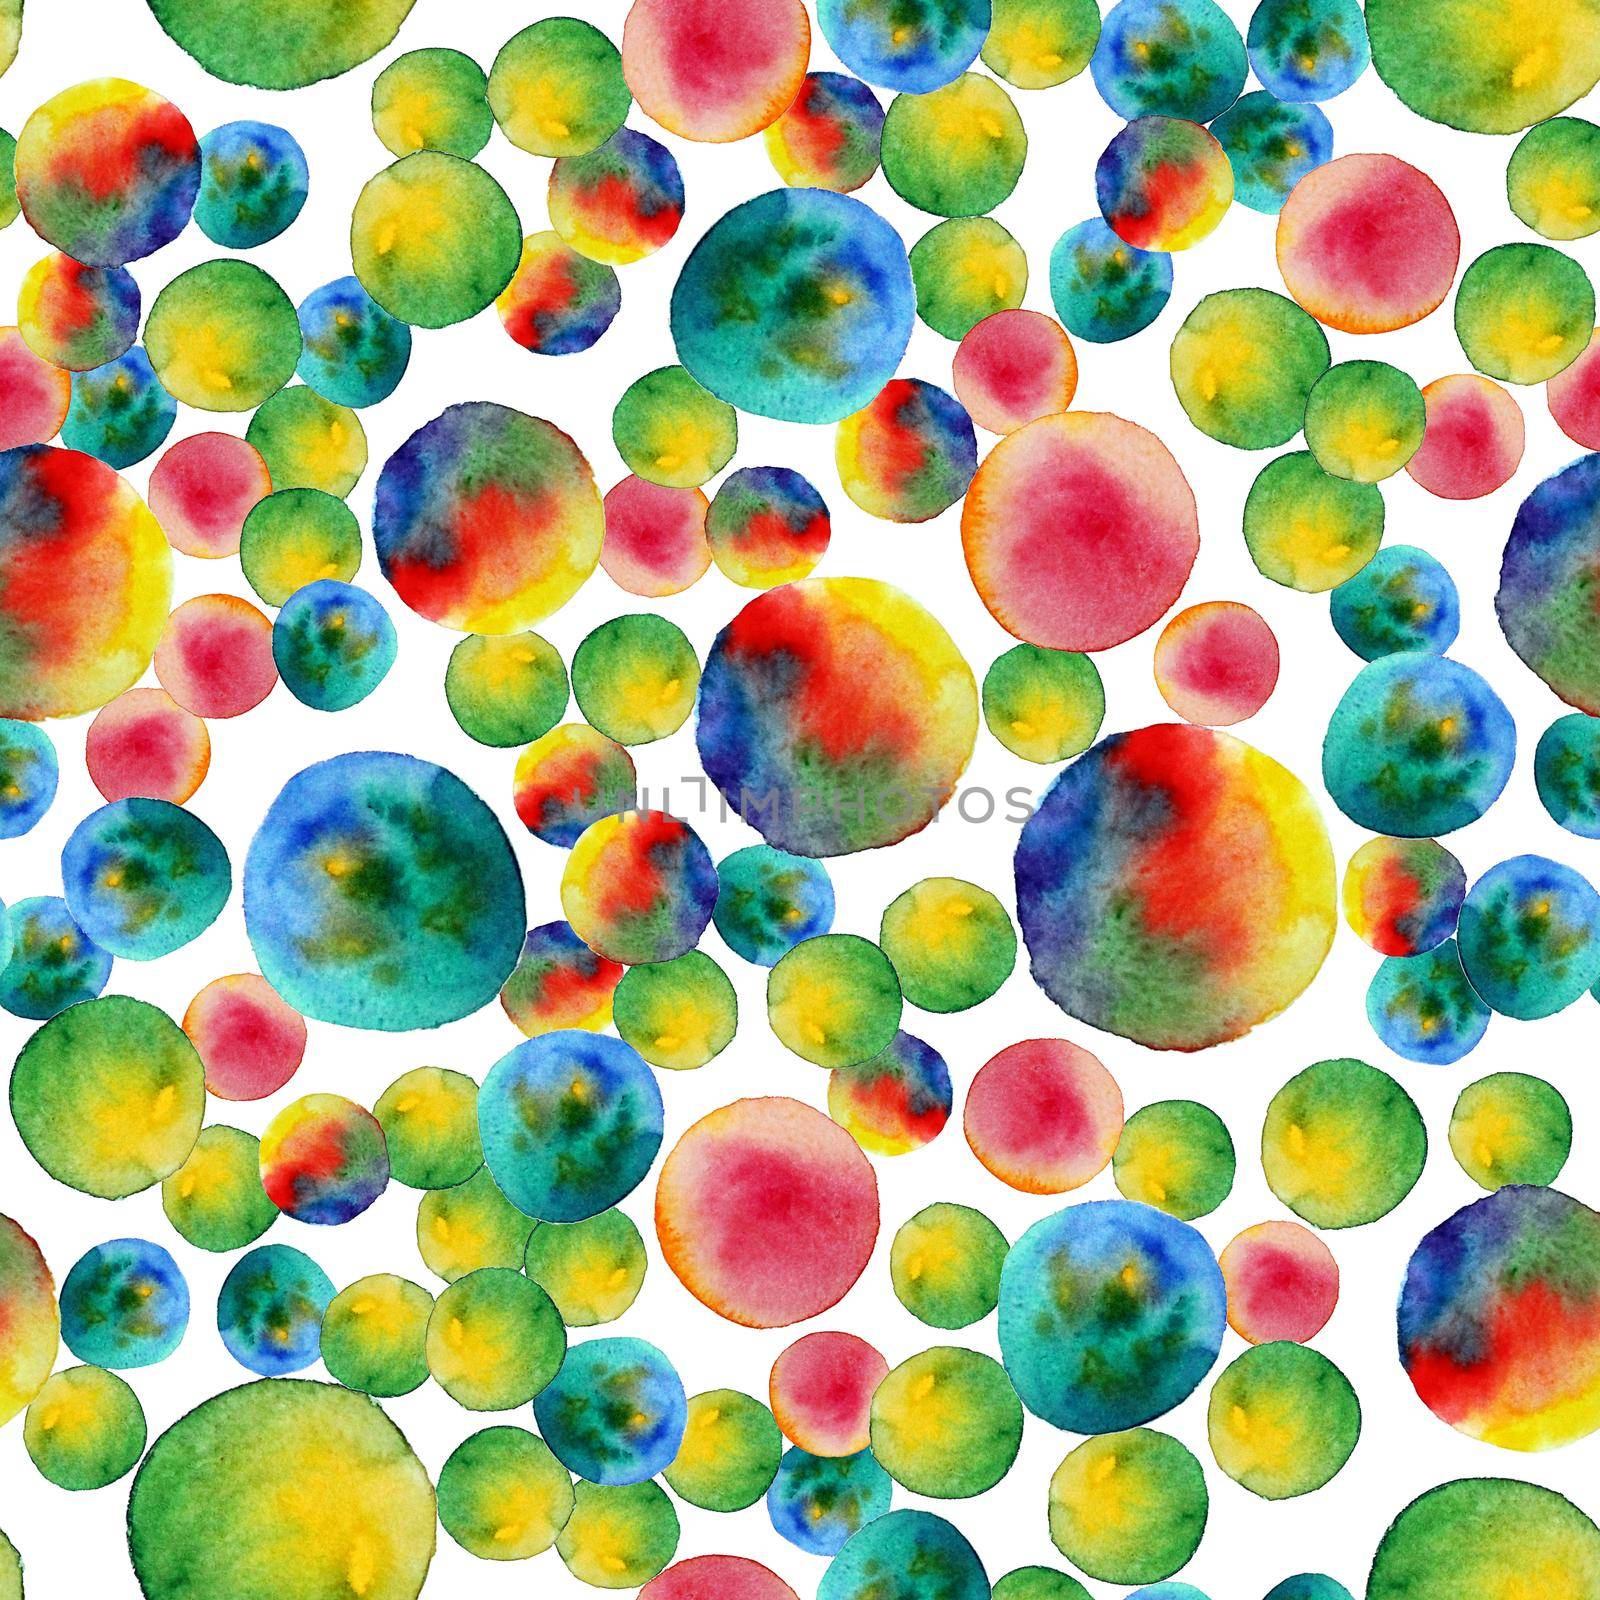 Seamless pattern. Watercolor abstract background. Watercolor round brushstrokes. On white background. Colorful and endless print